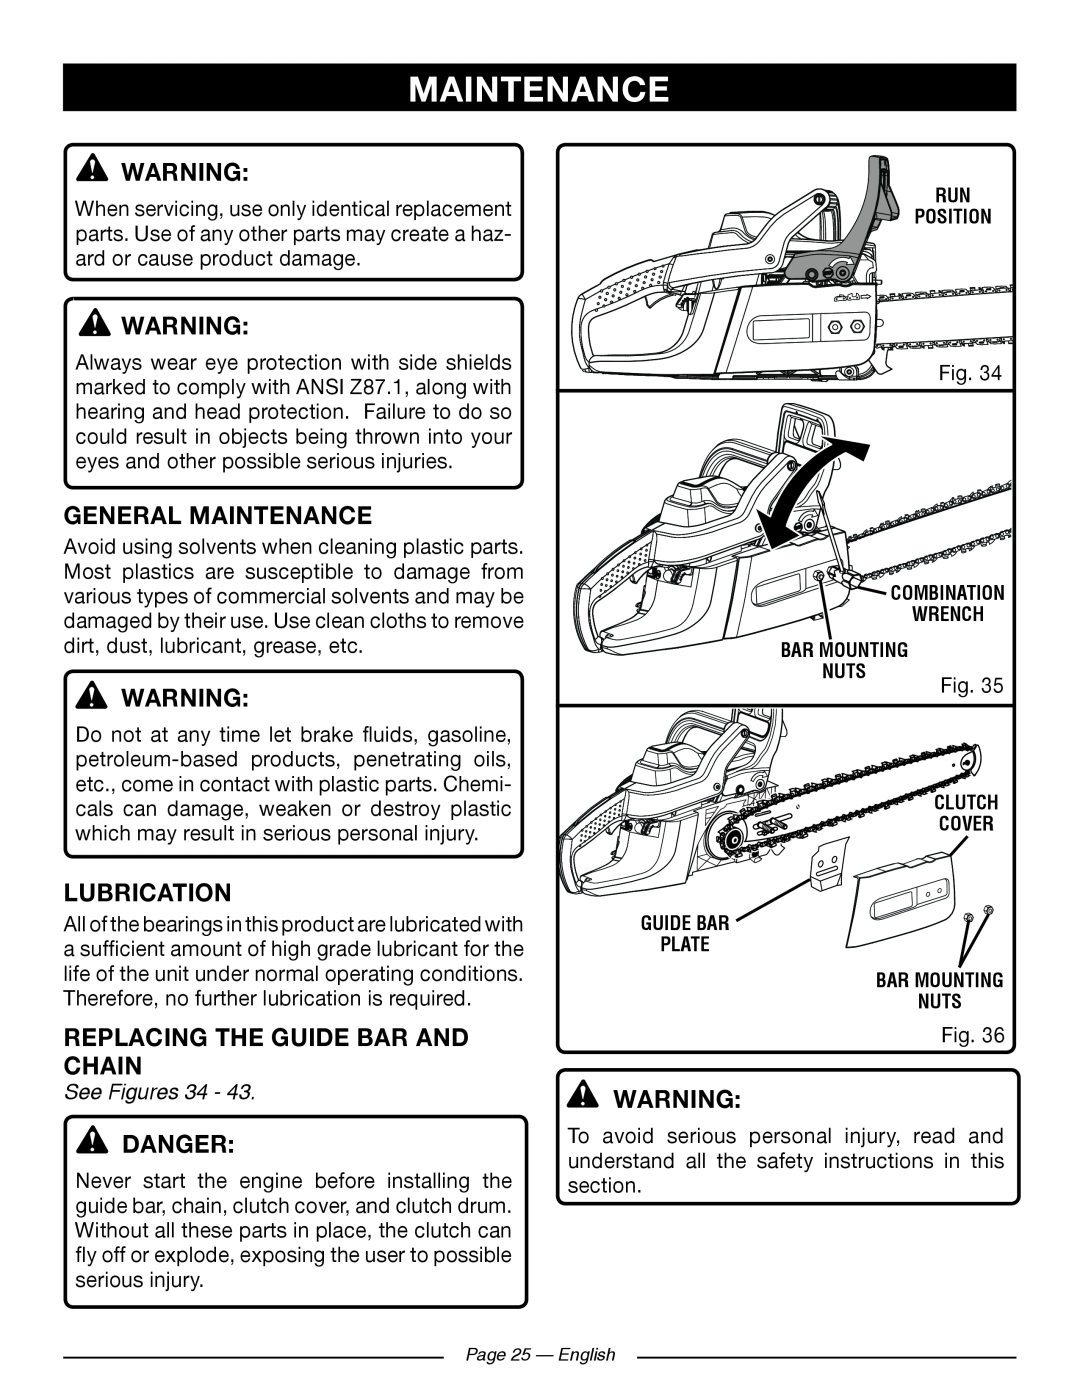 Ryobi RY10518, RY10520 General Maintenance, Lubrication, Replacing The Guide Bar And Chain, See Figures 34, Danger 